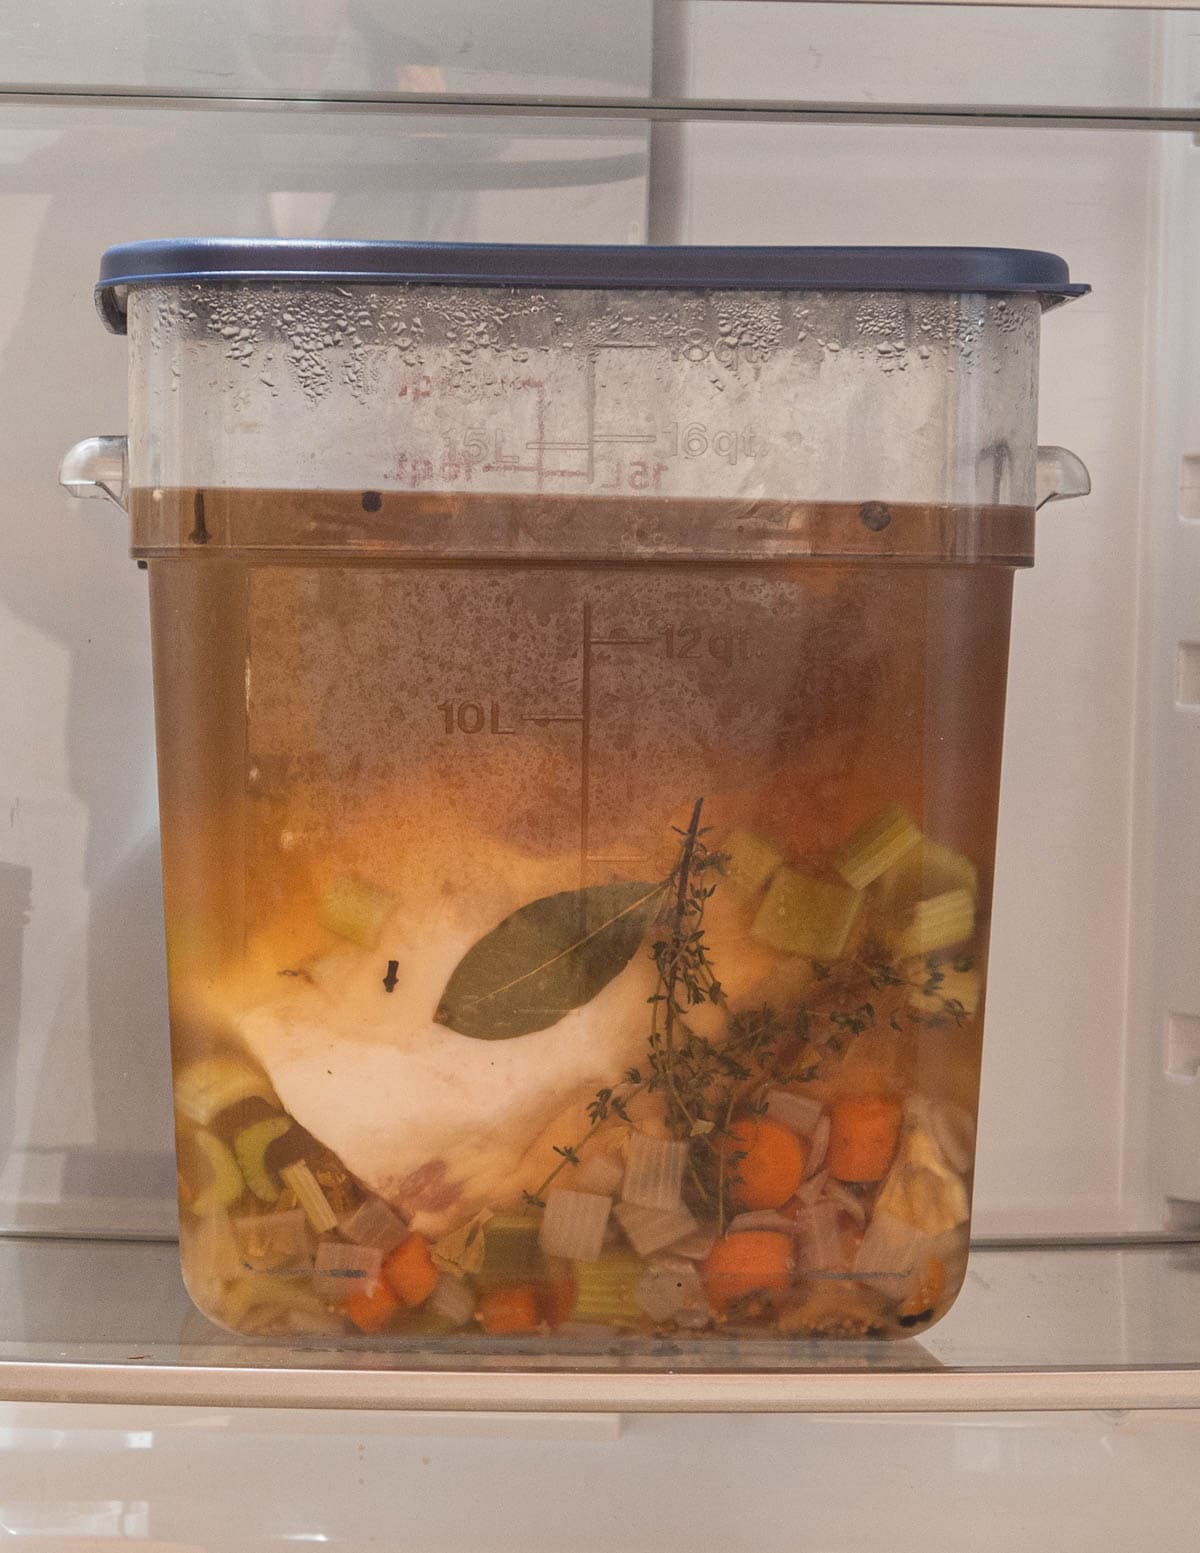 A container holding a pig head in brine in the fridge. 